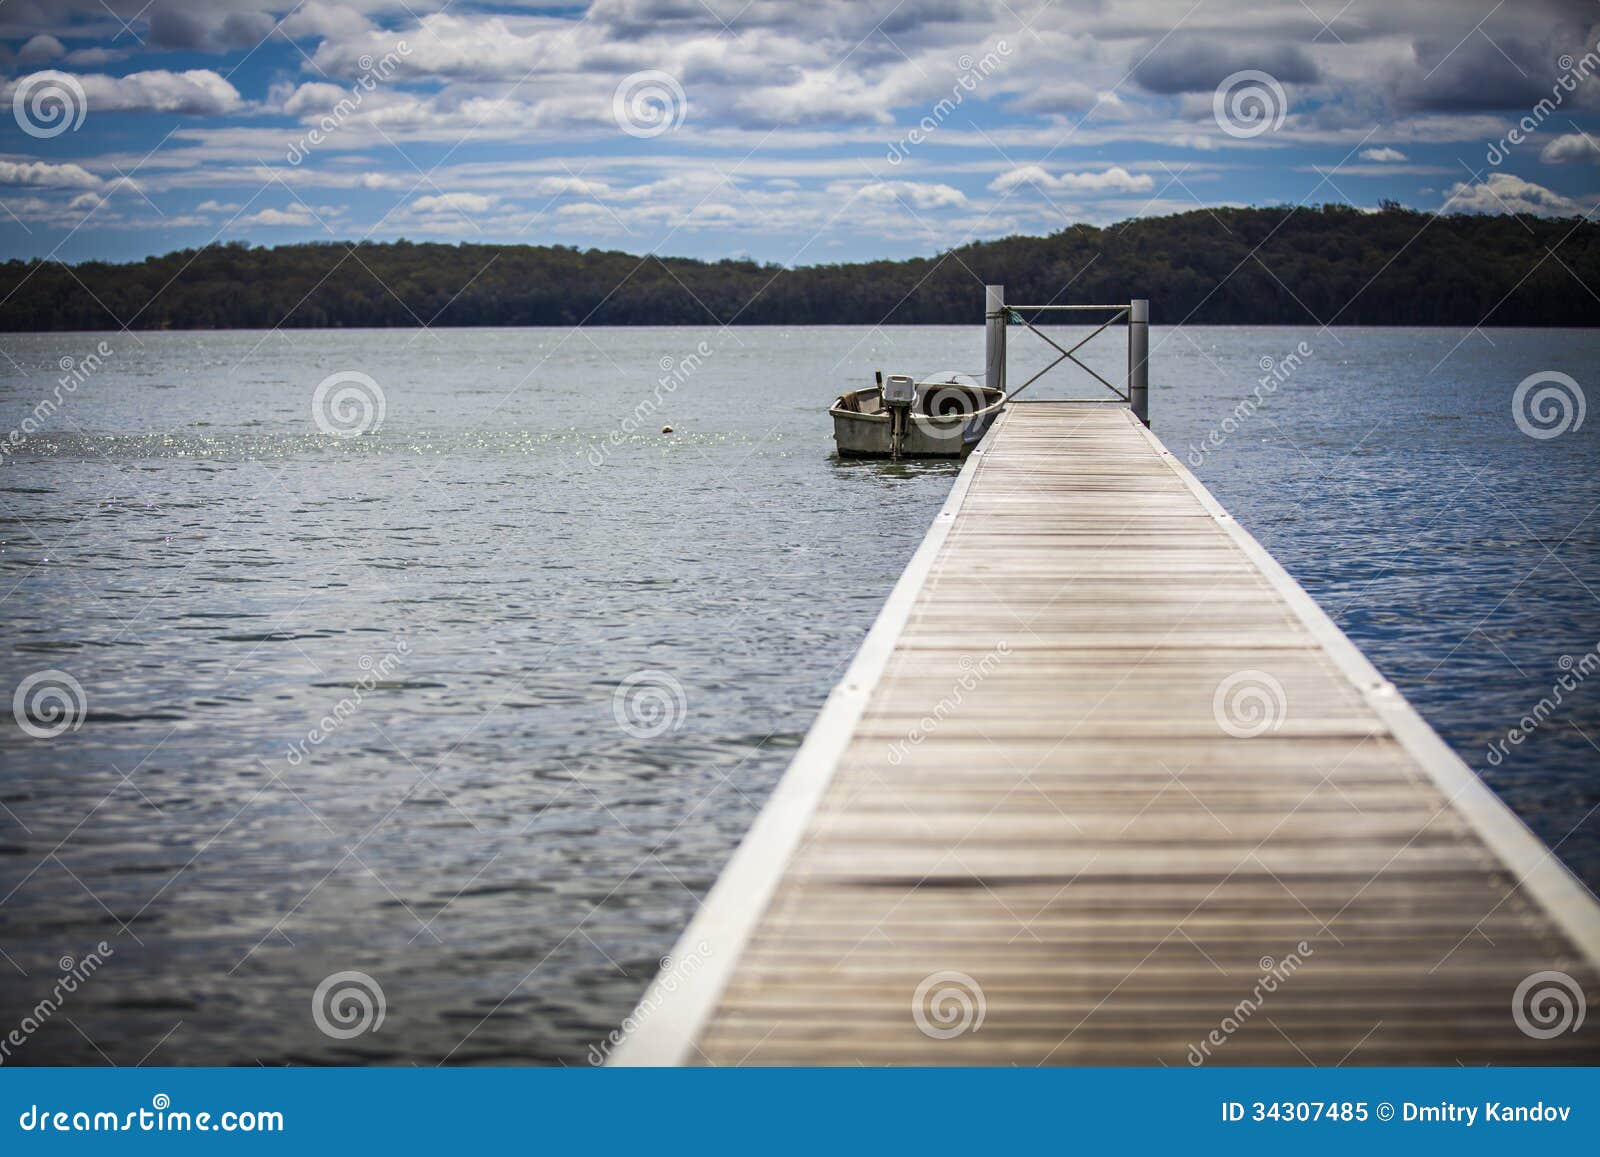 Boat at end of pier on lake. Scenic view of lake with boat at end of long pier.